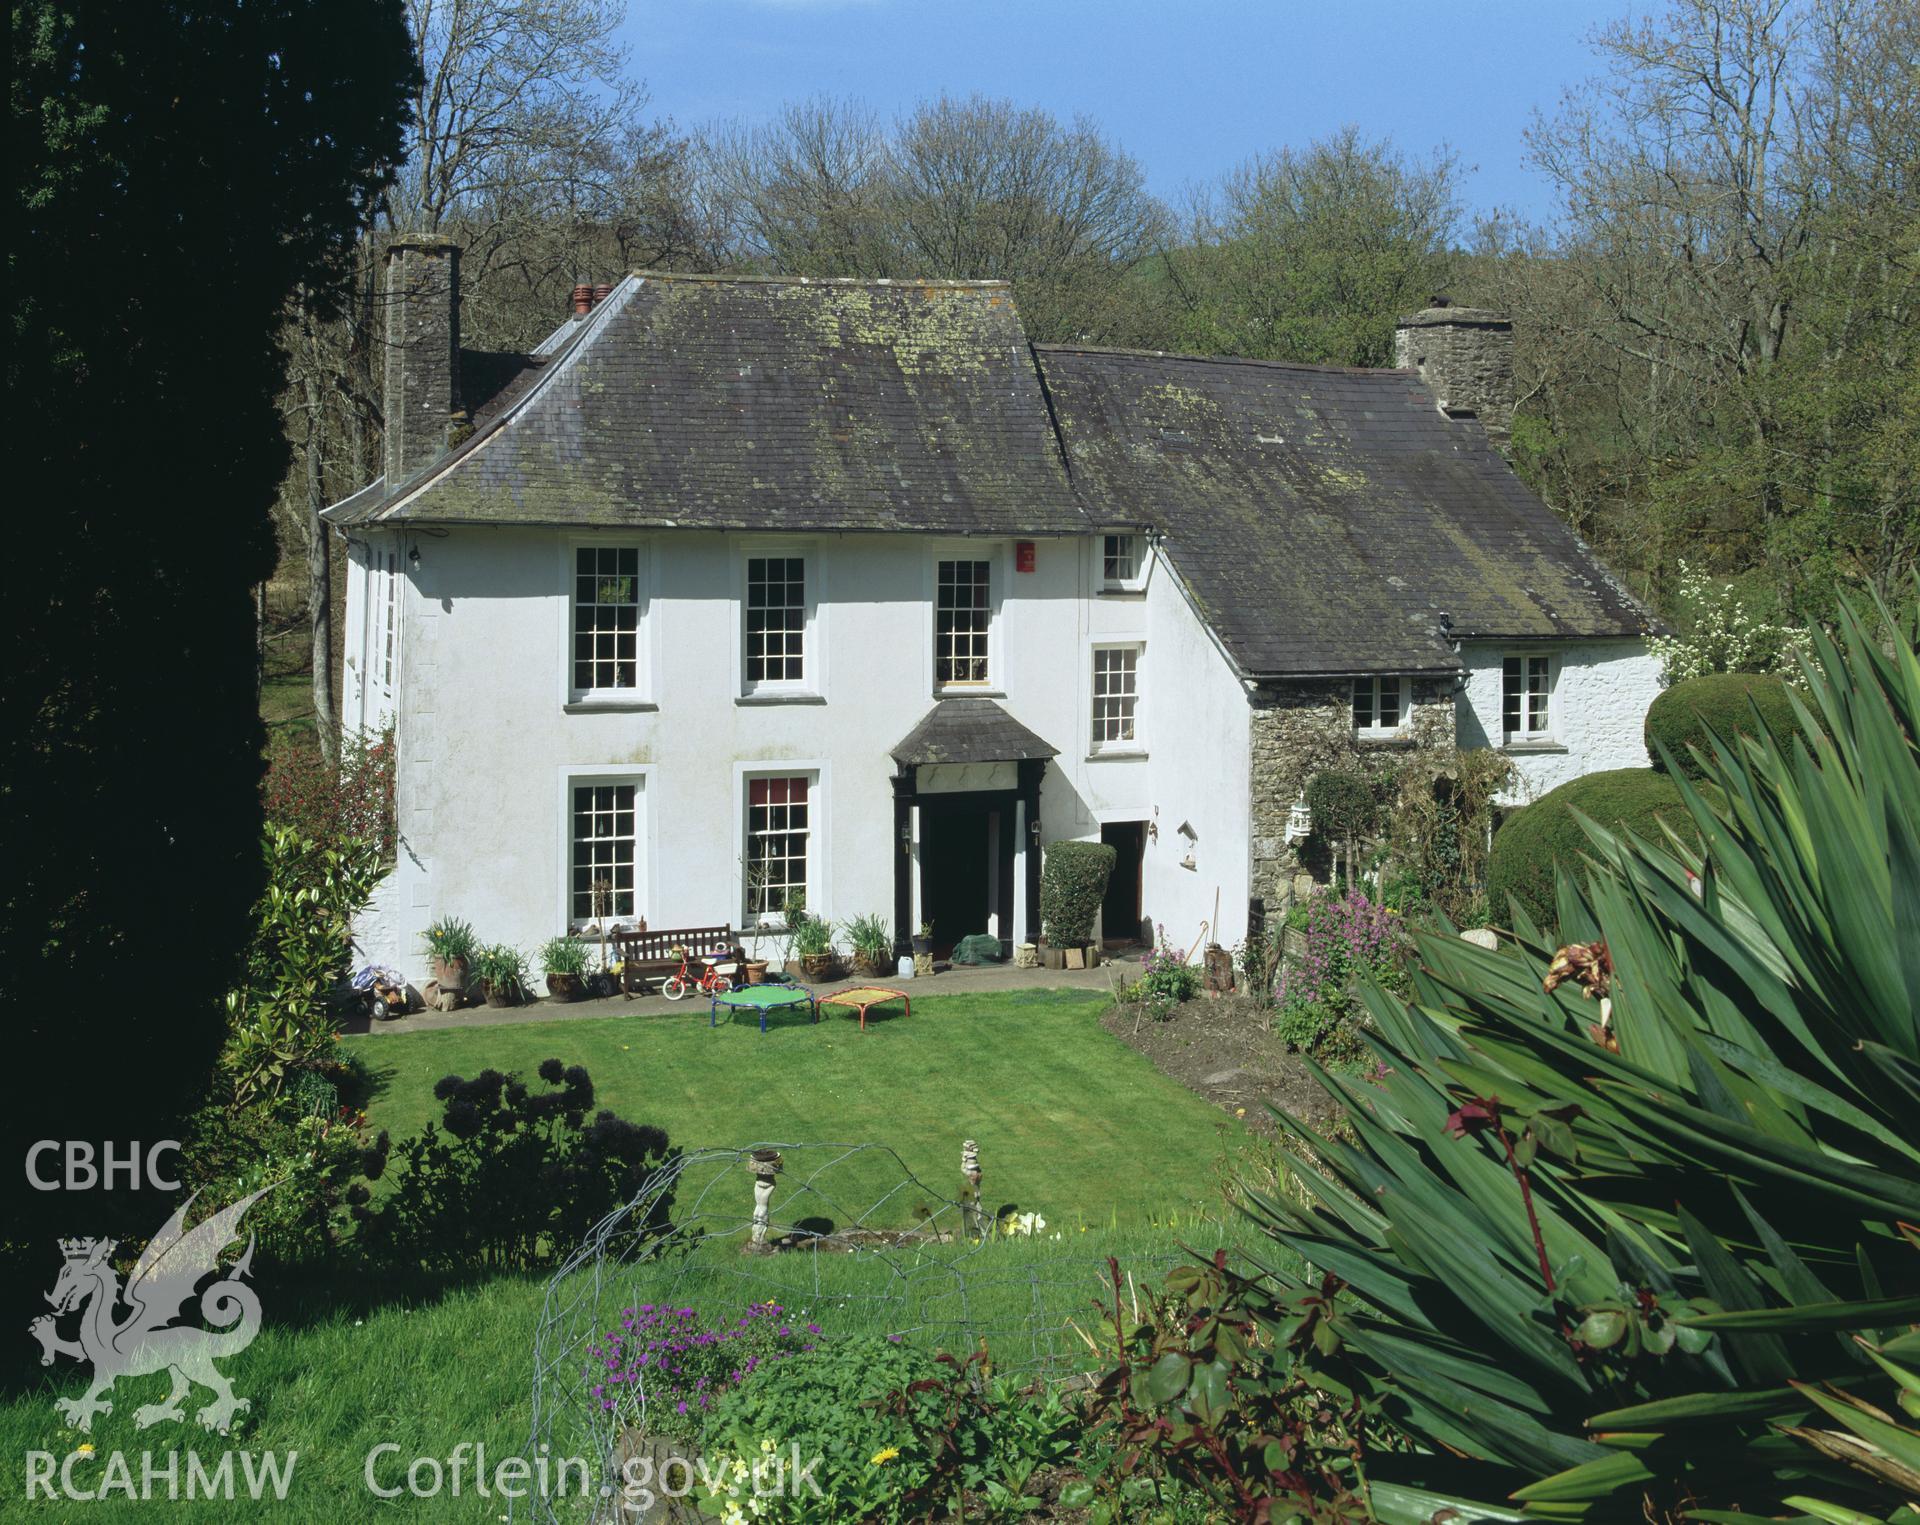 Colour transparency showing an exterior view of Plas y Wern , Ceredigion, produced by Iain Wright, June 2004.